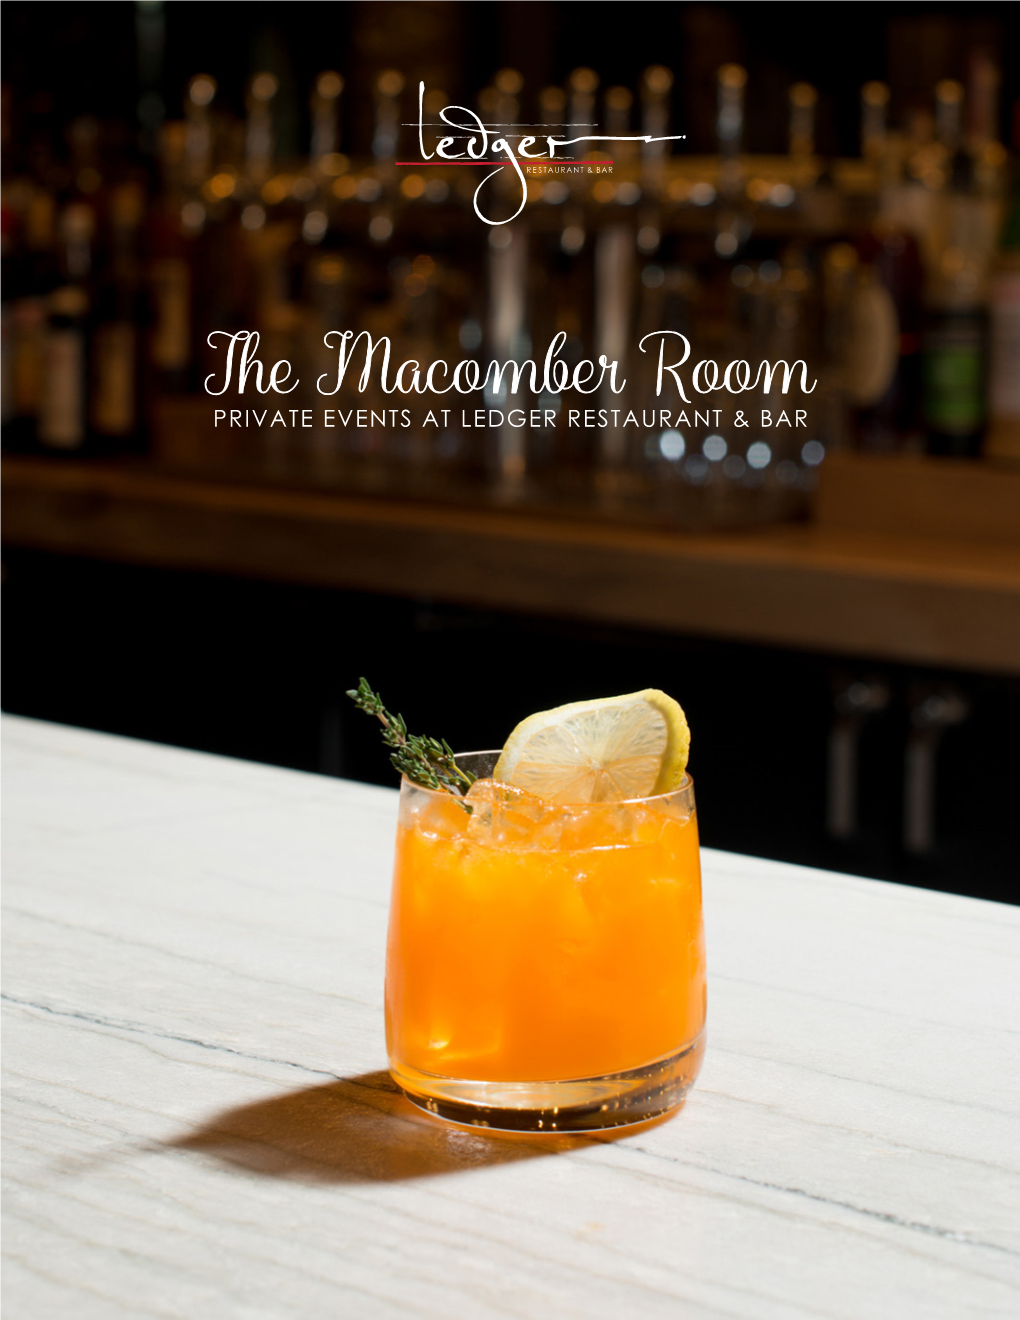 The Macomber Room PRIVATE EVENTS at LEDGER RESTAURANT & BAR Write Your History with Ledger